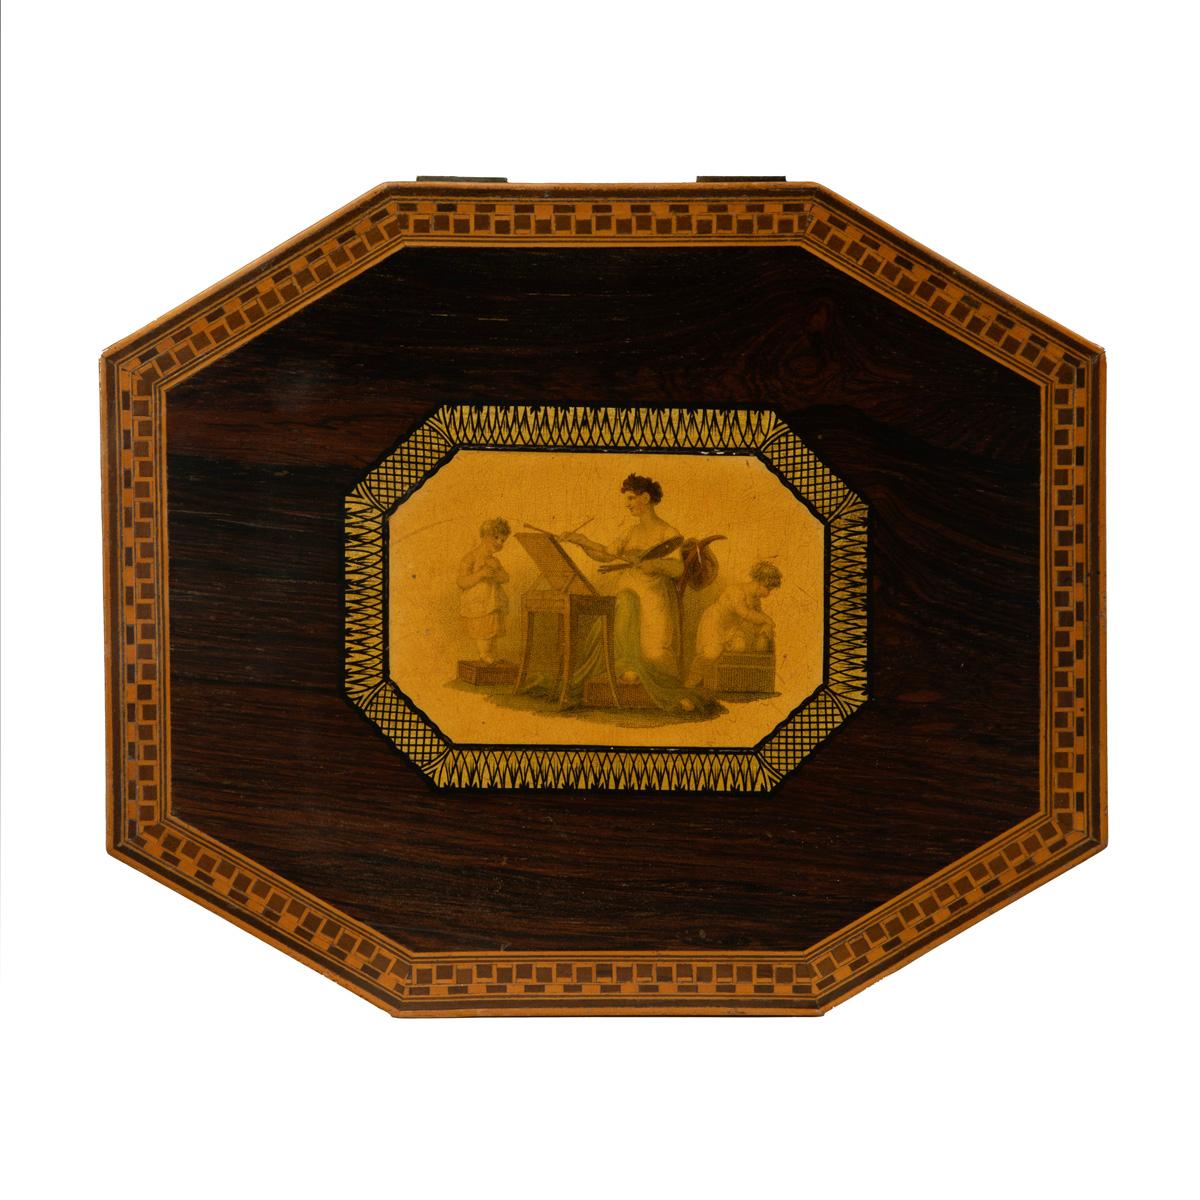 An octagonal Regency rosewood card box, the hinged lid with a central cartouche showing a classical lady painting a child while another child plays on a stool, all within a gilt and black penwork border, with boxwood stringing and inlays, the pale